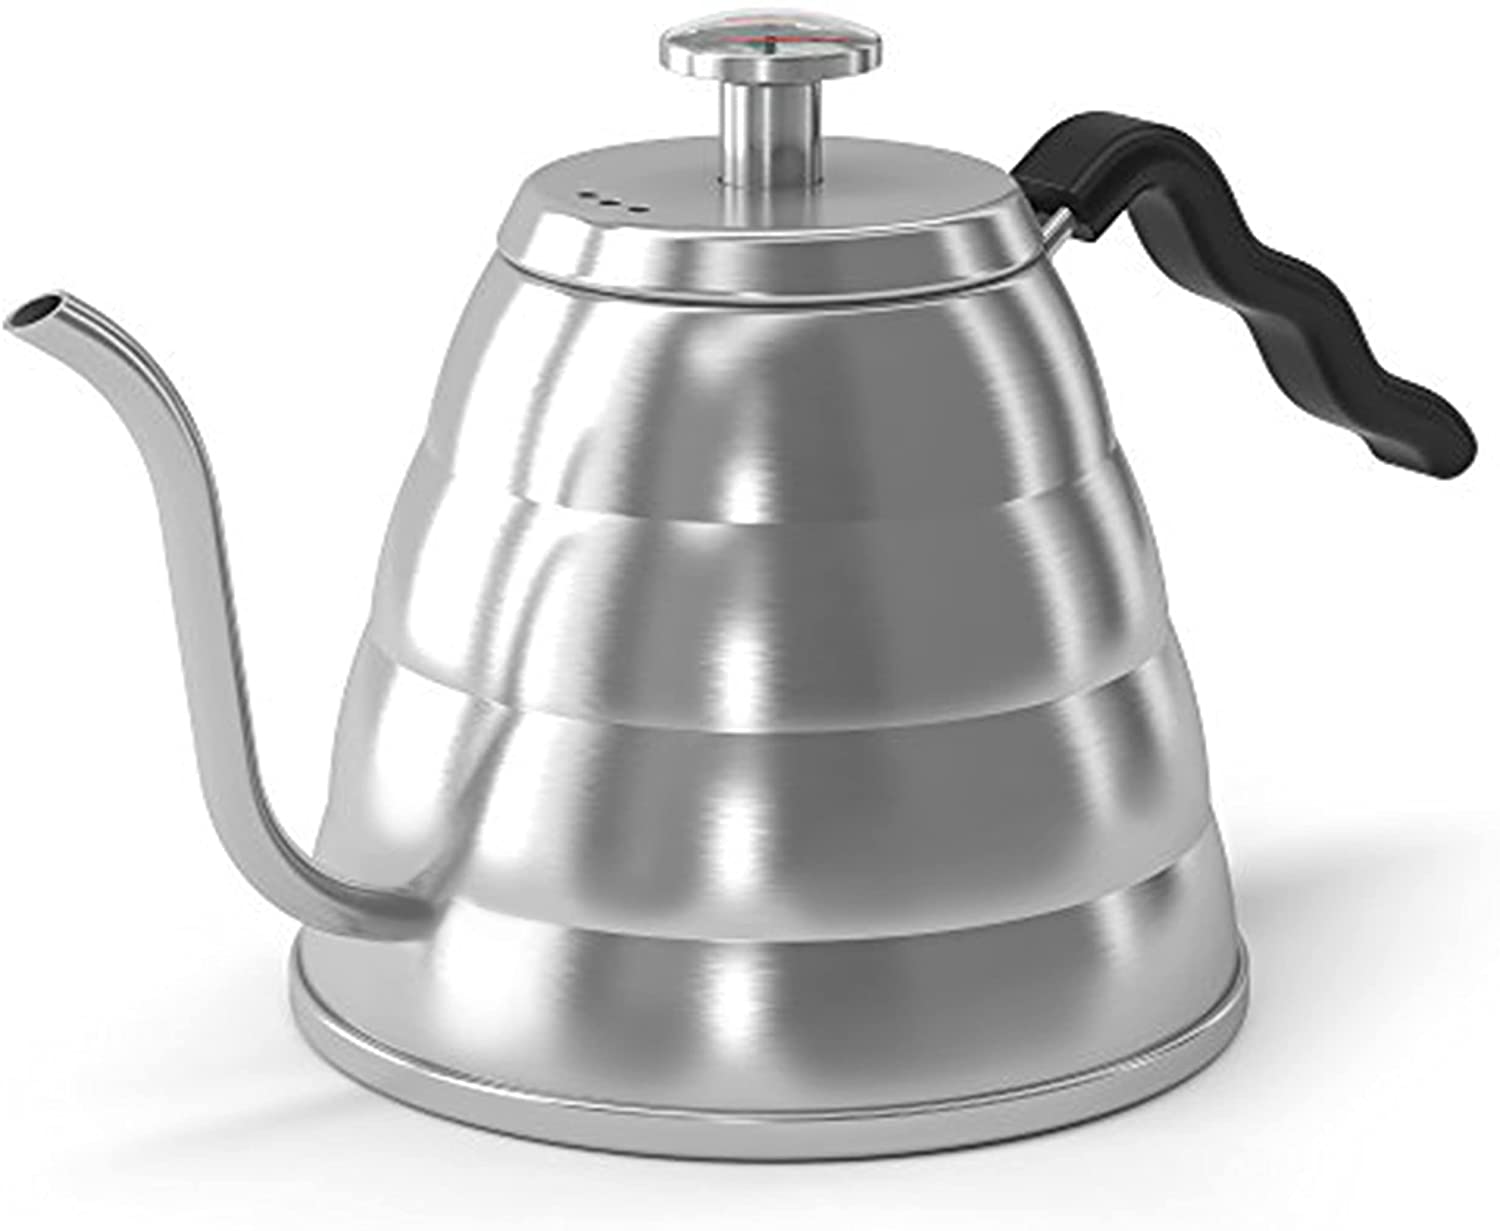 1. Coffee Gator Gooseneck Kettle with Thermometer 